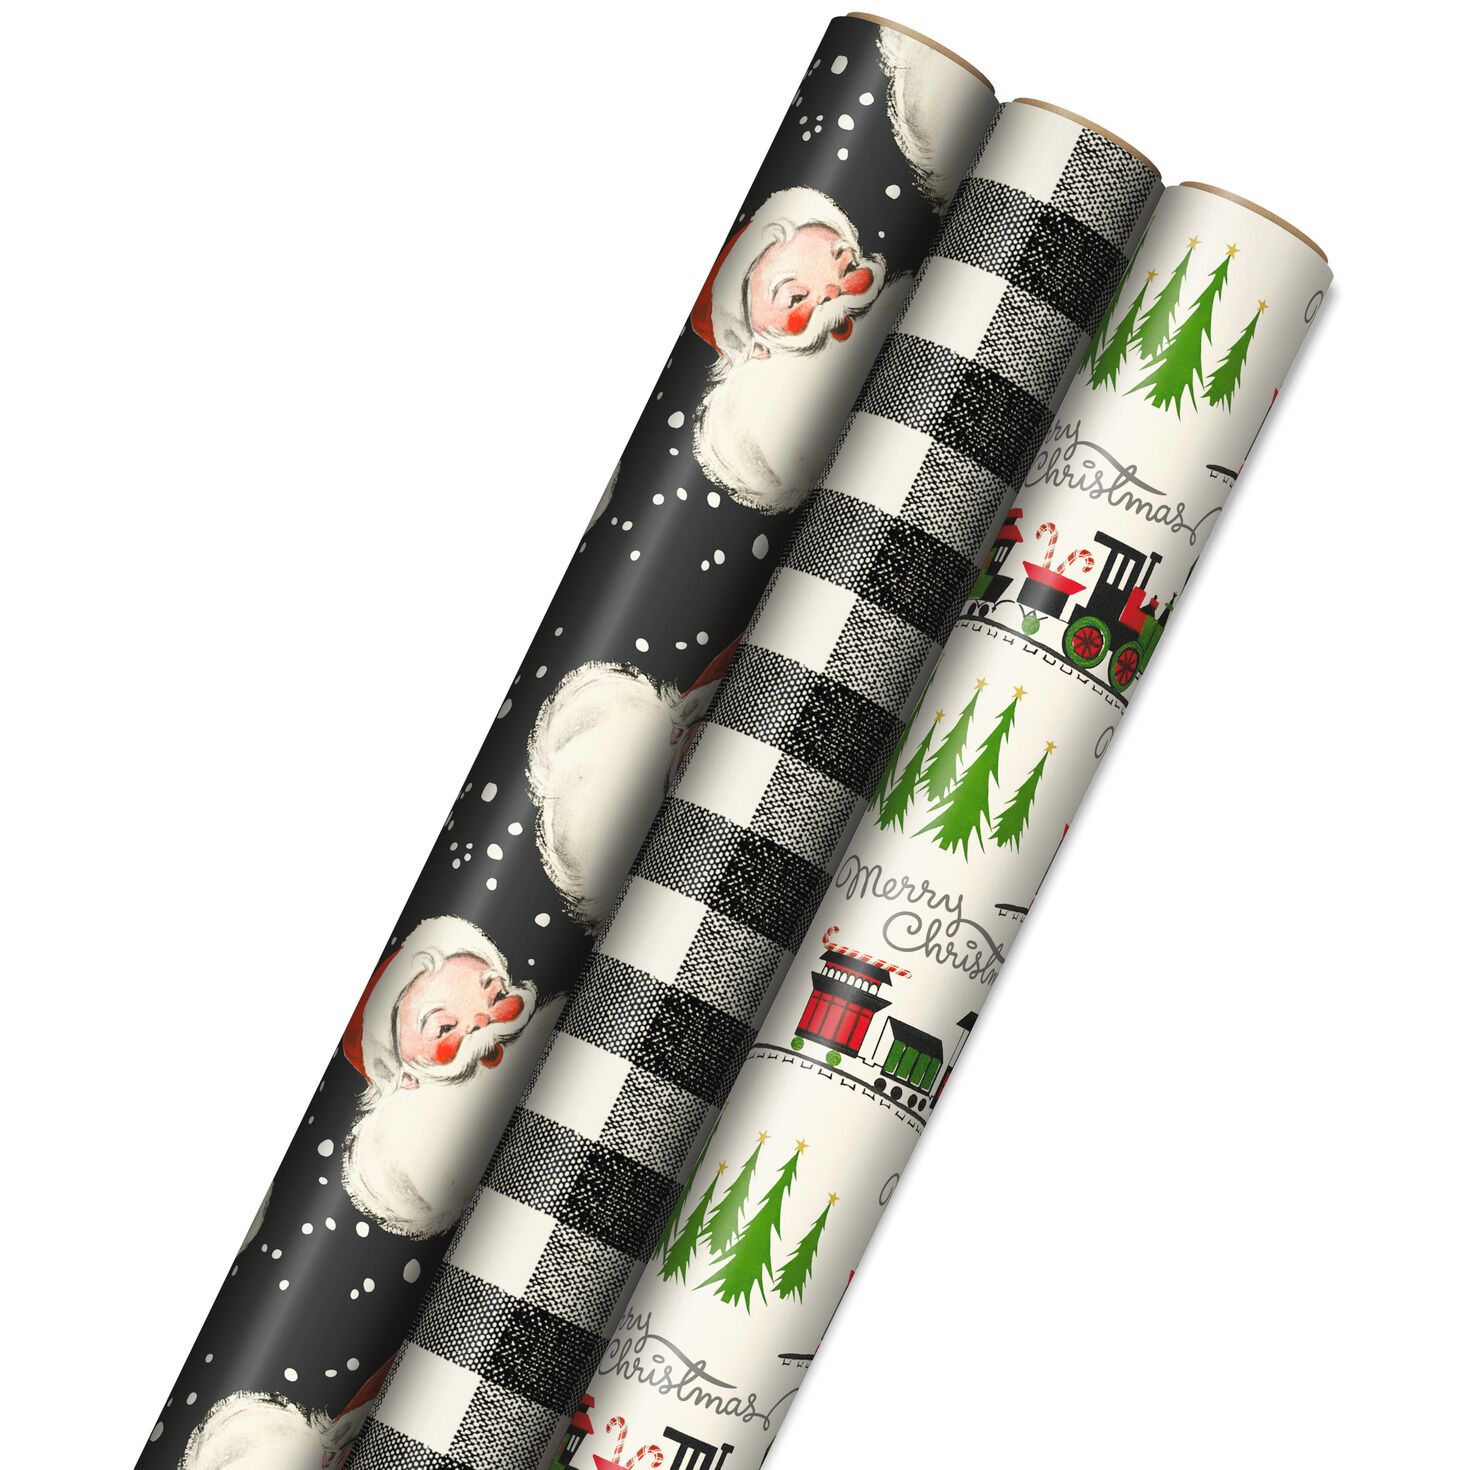 Vintage Wrapping Paper. All Occasion Wrapping Paper. Hallmark Wrapping Paper.  Cute Animal Gift Wrap. 